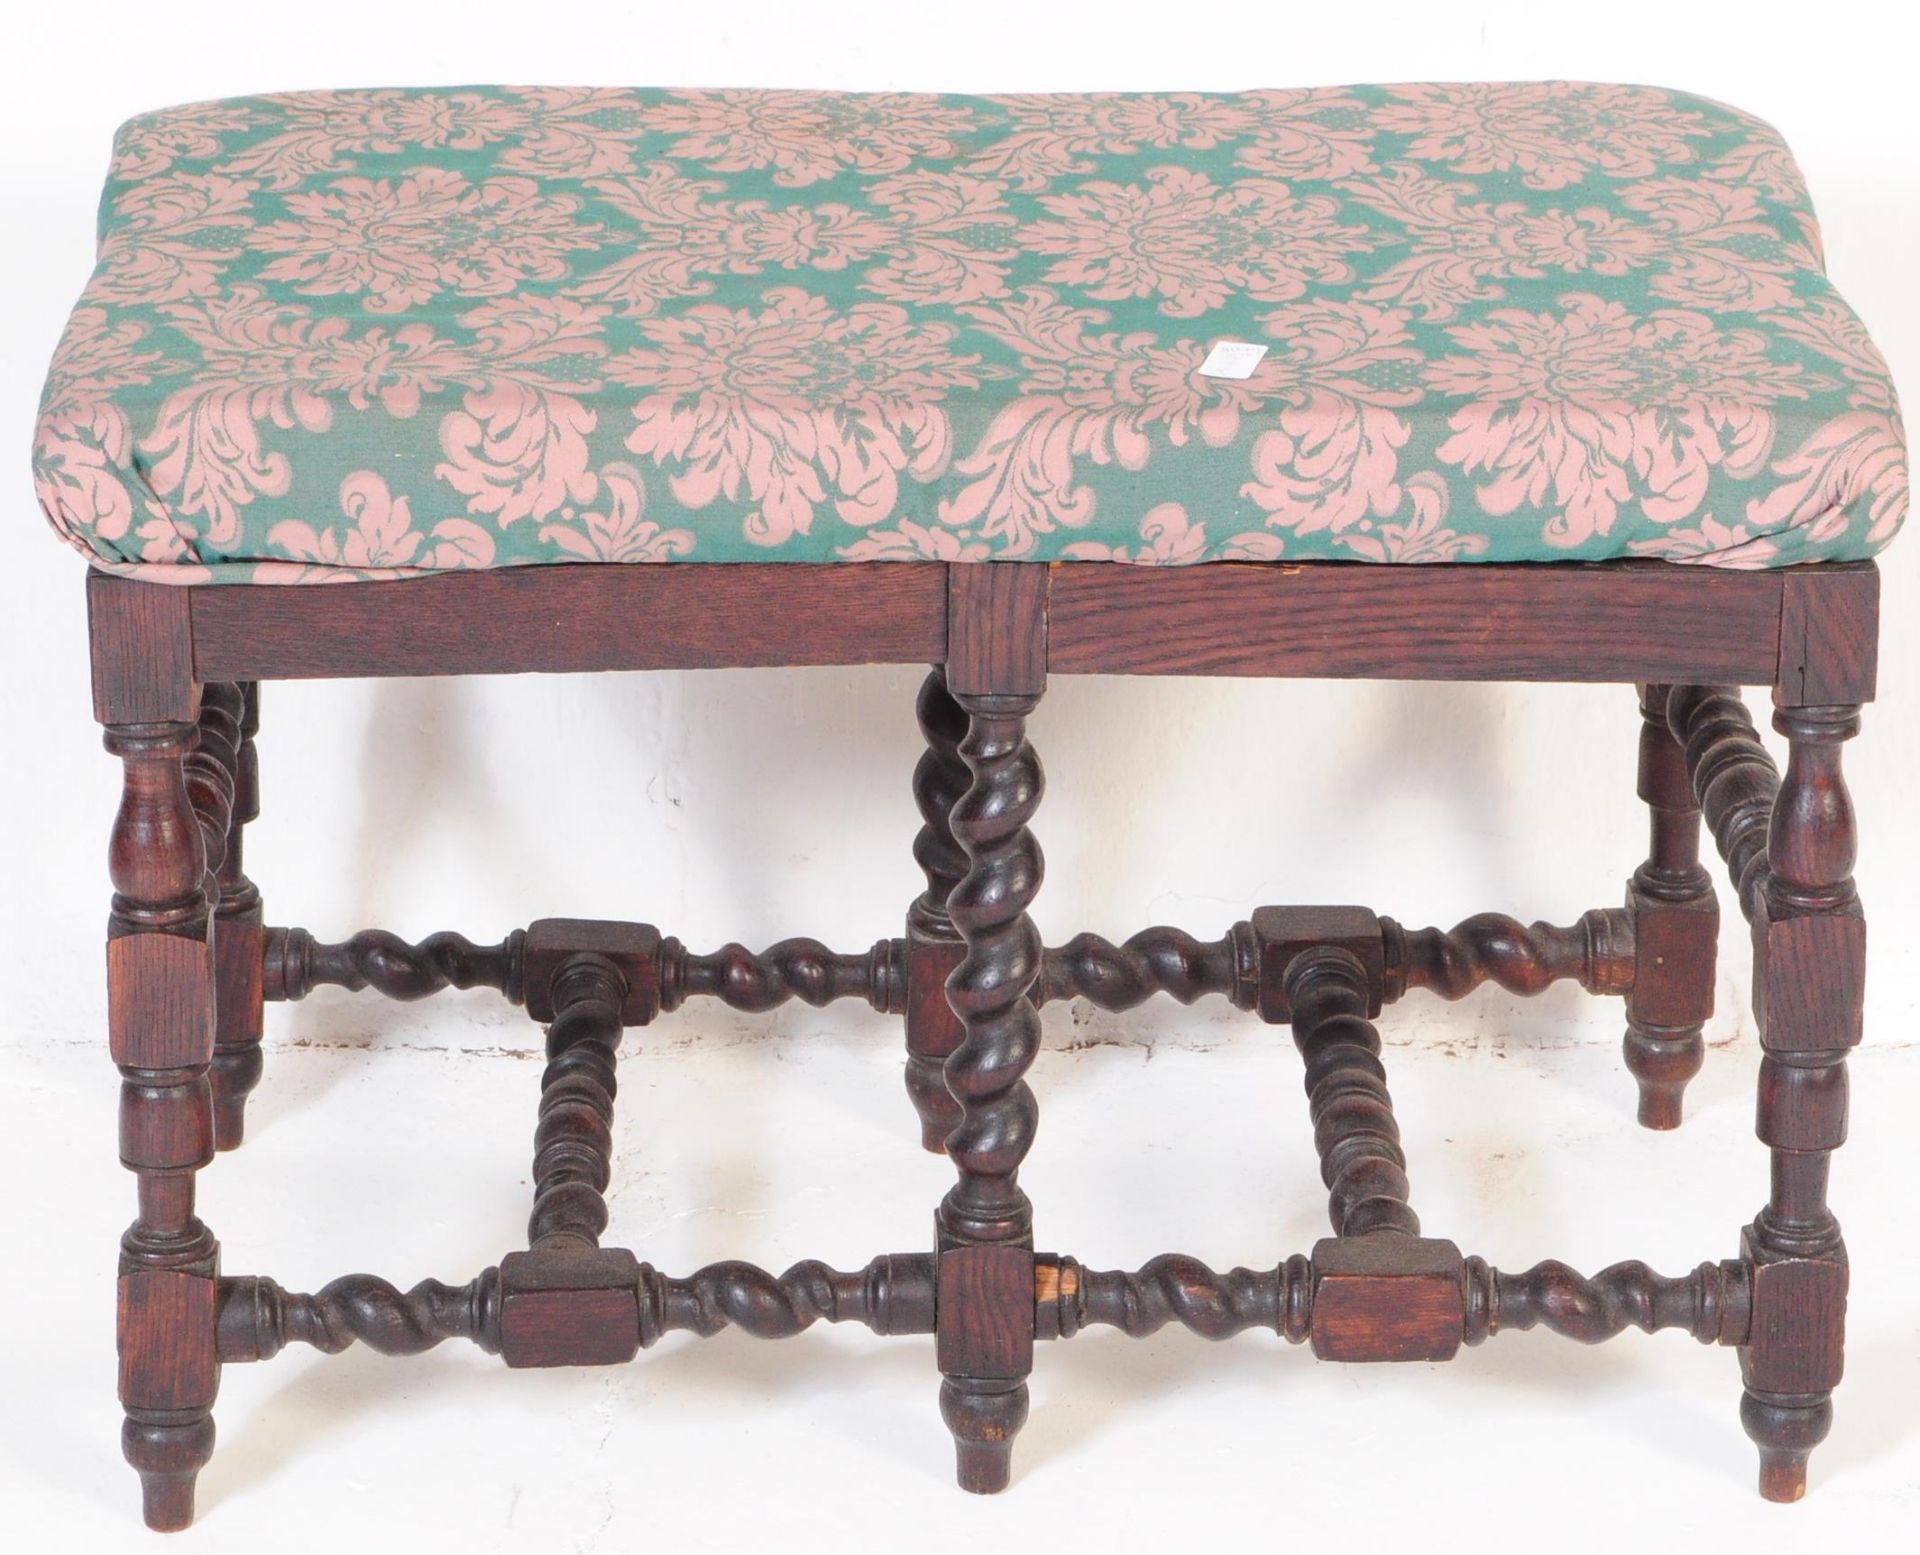 VICTORIAN 19TH CENTURY DOUBLE SEATED PIANO STOOL - Image 4 of 5